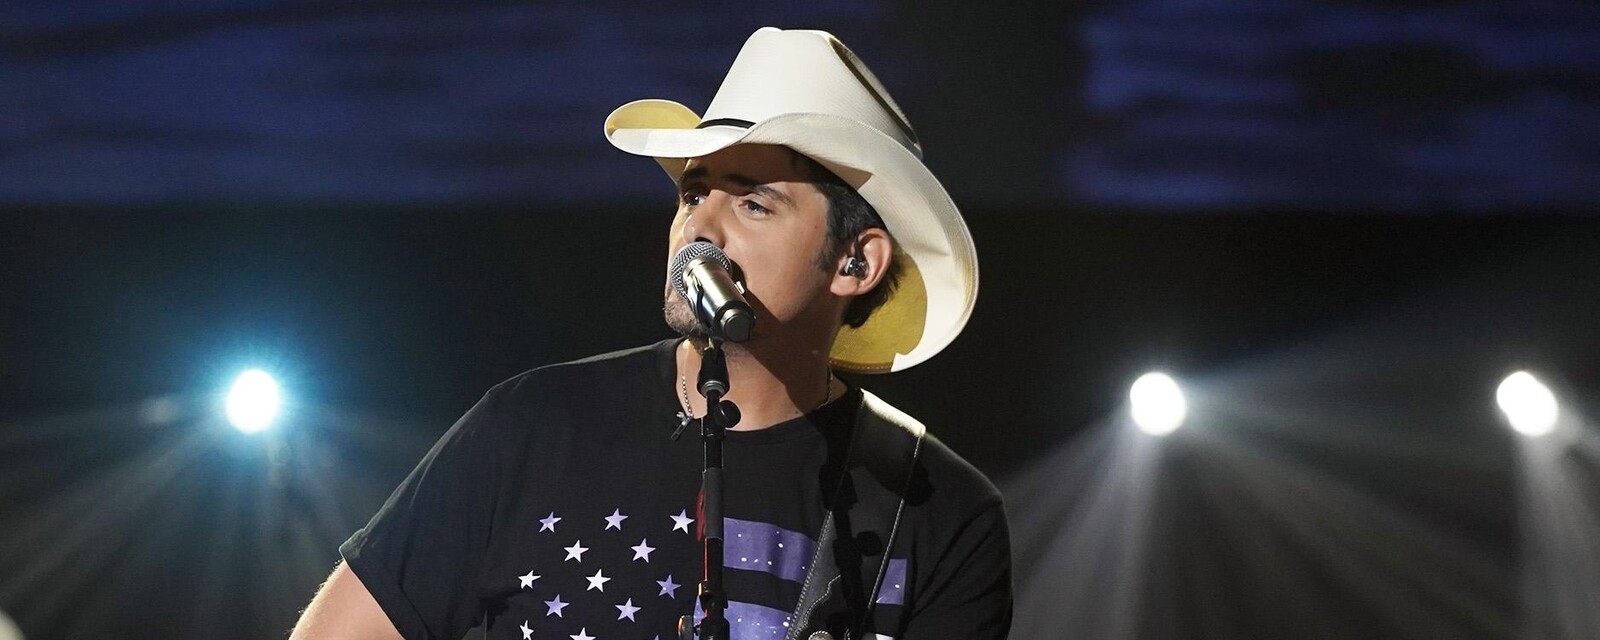 Brad Paisley, Biography, Songs, & Facts